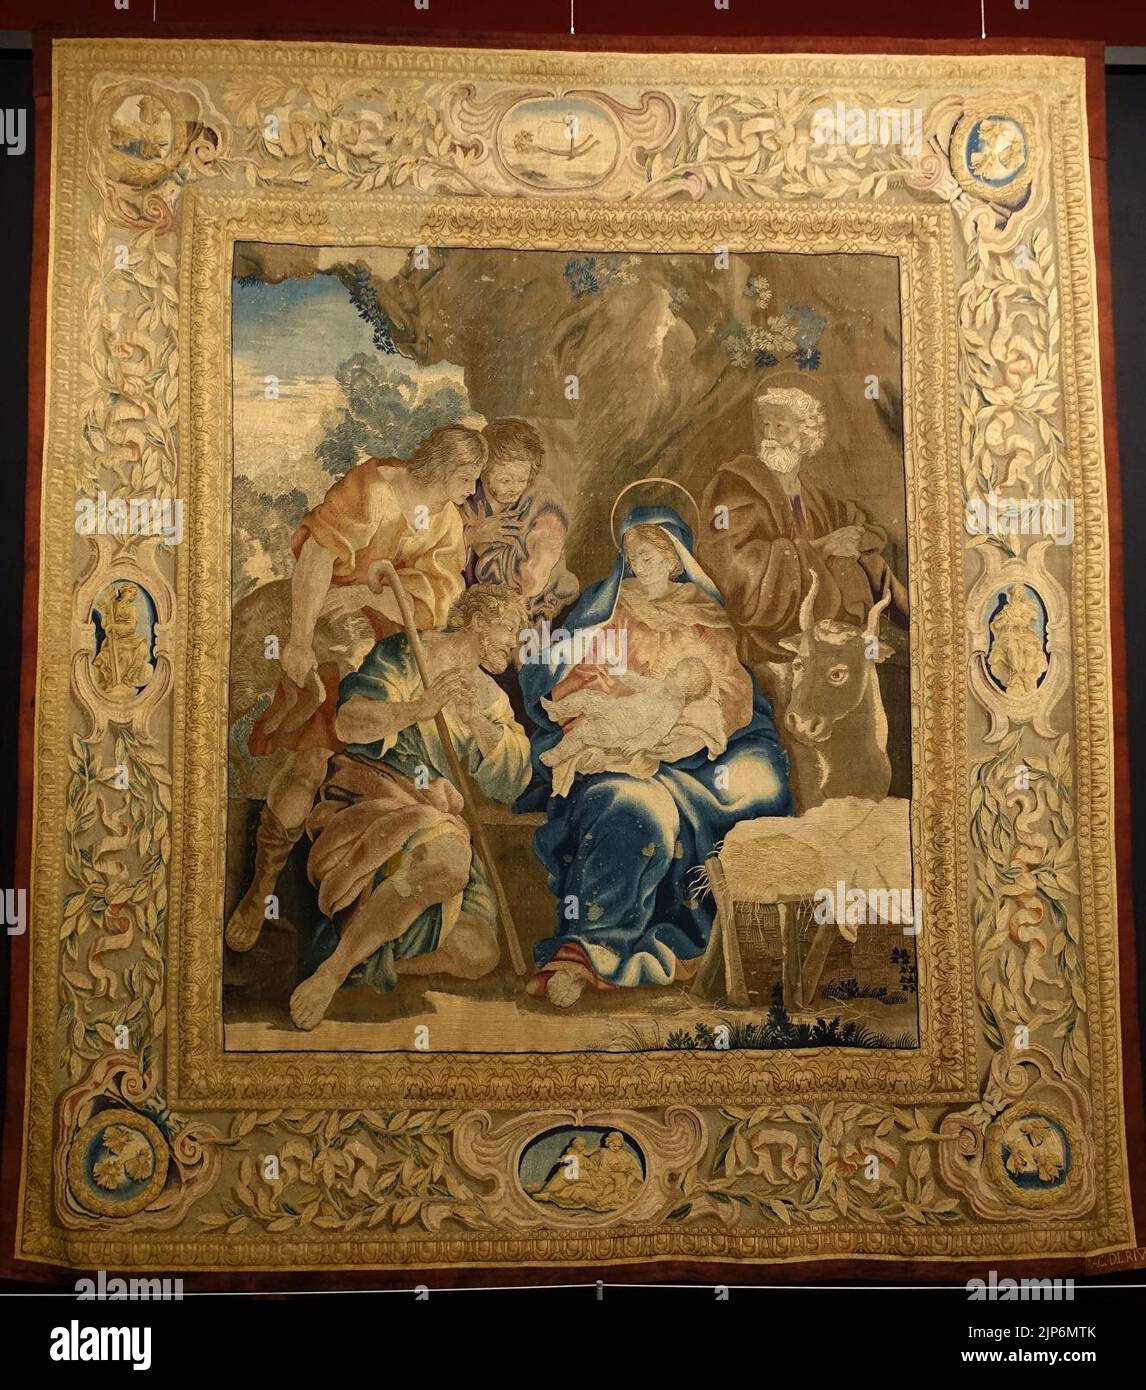 The Nativity, from the Life of Christ, Barberini Tapestries, Rome, 1644-1656 Stock Photo